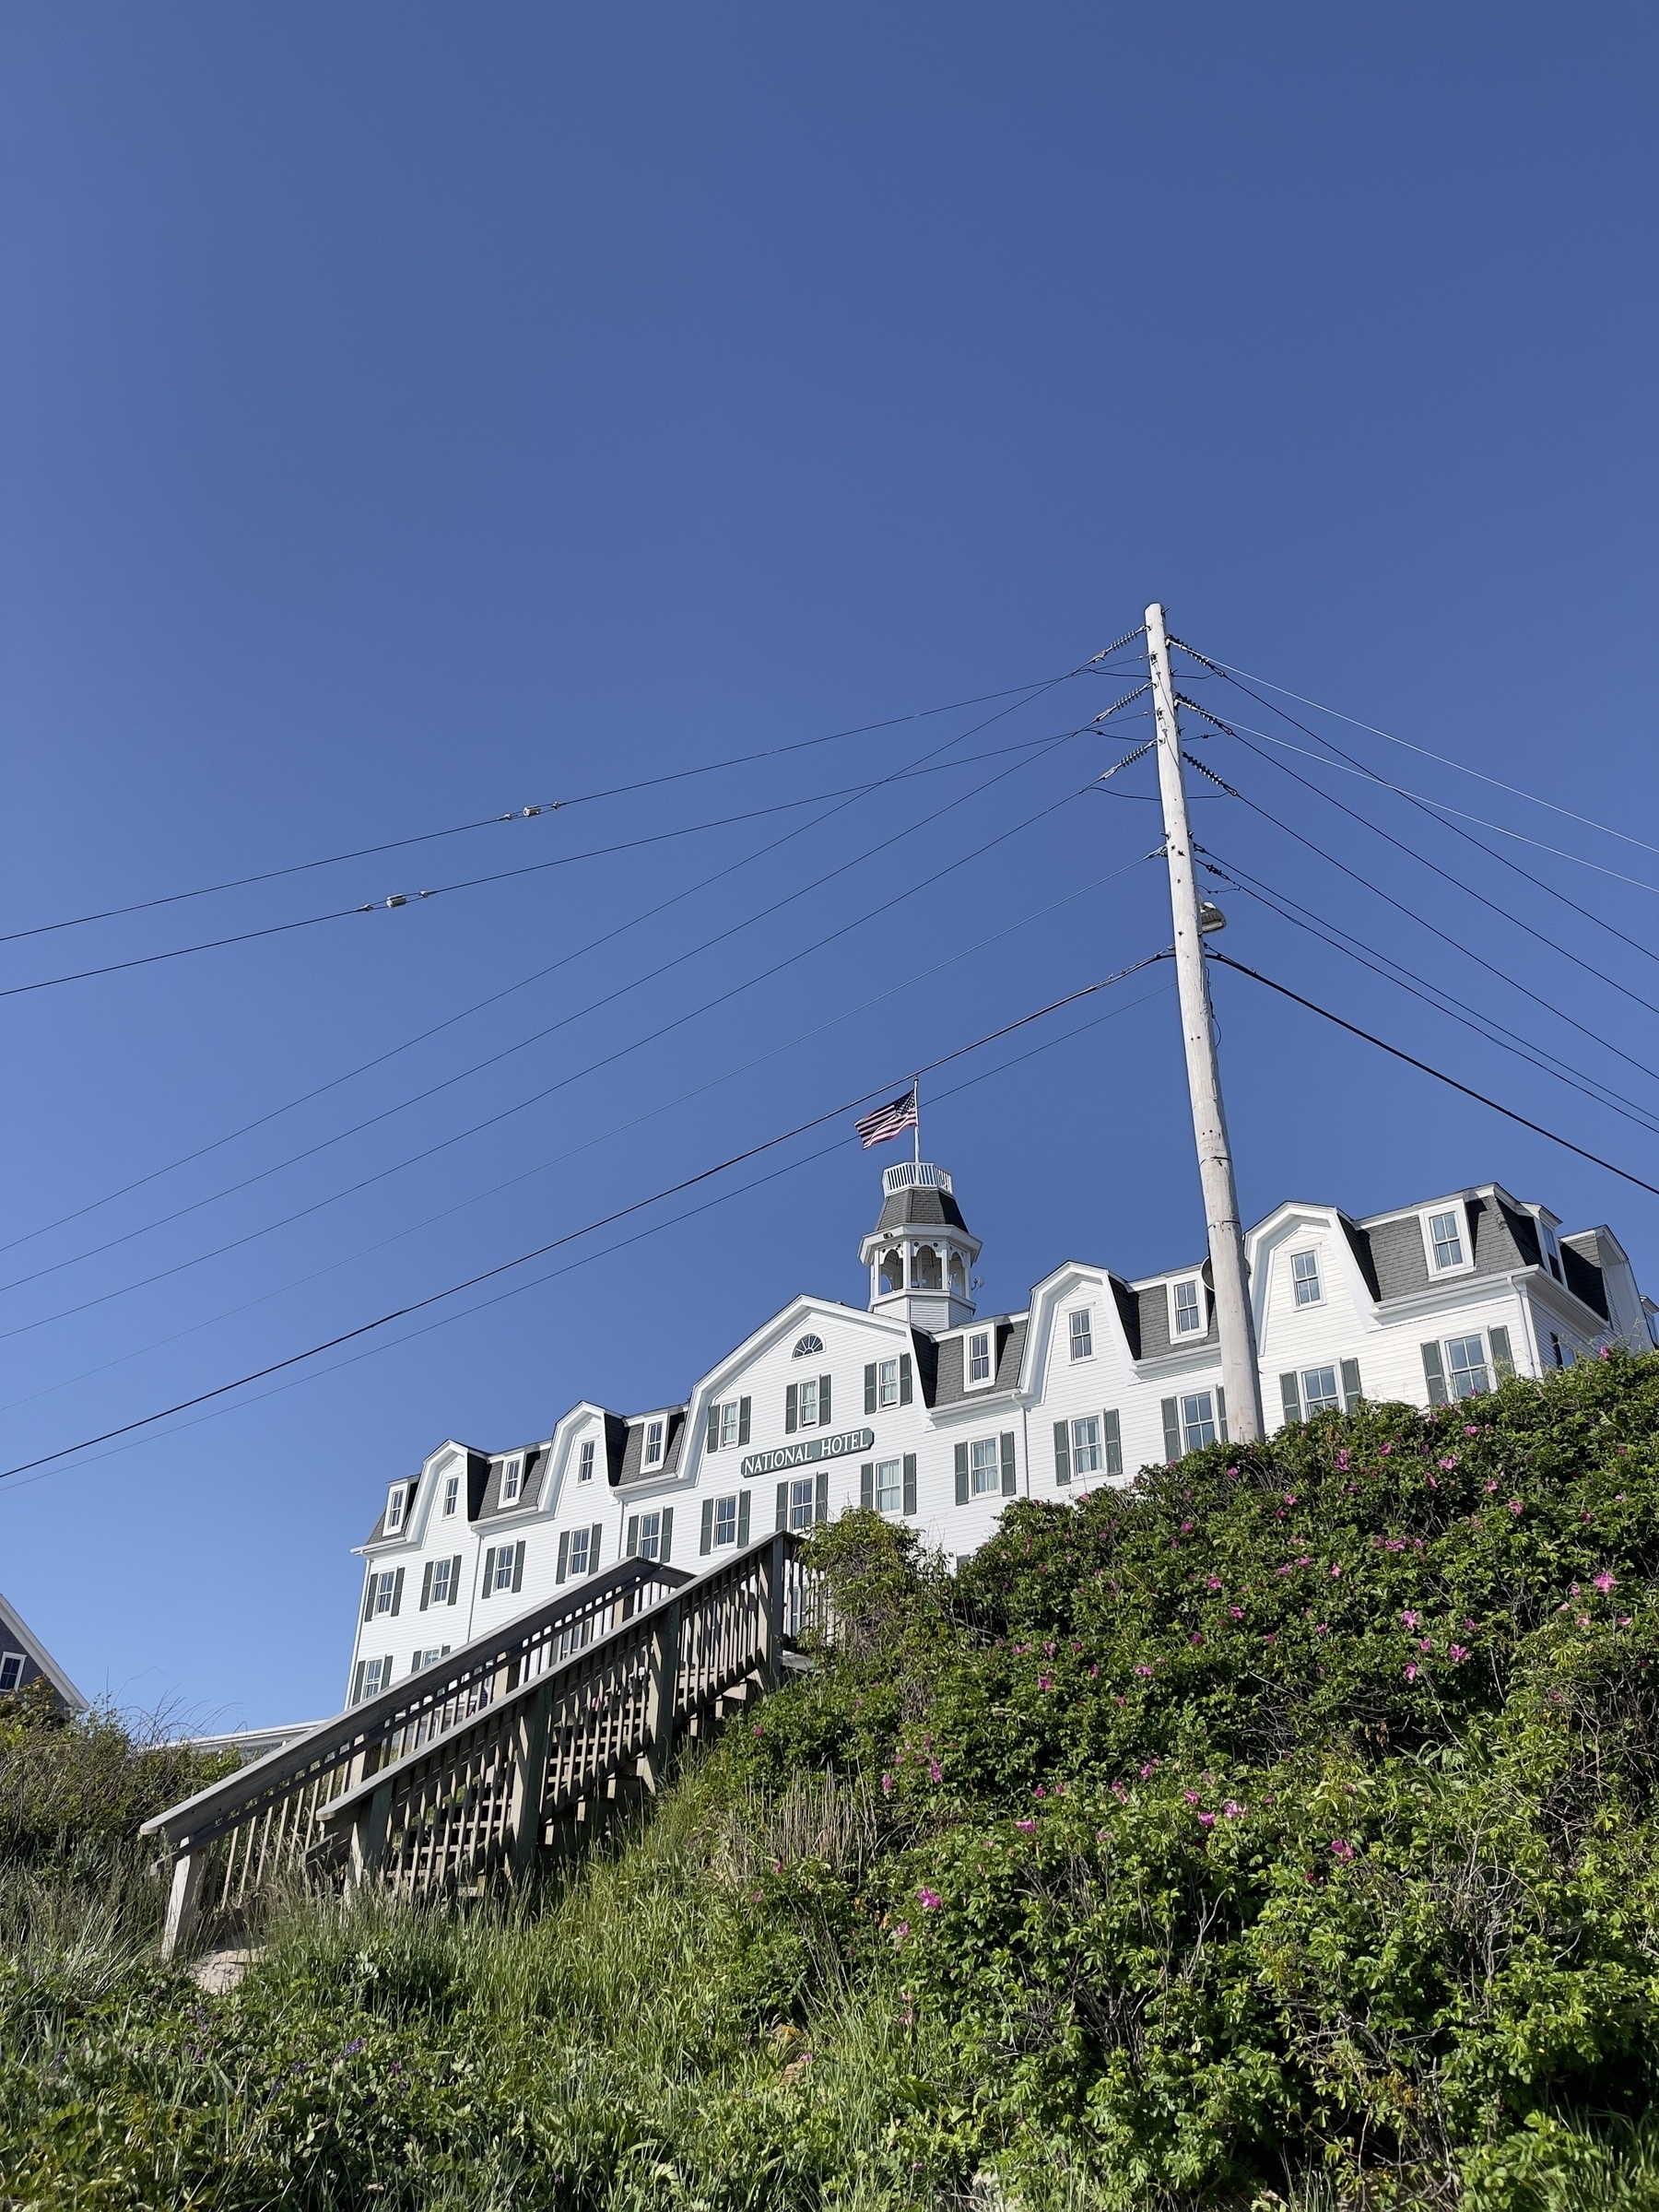 The National Hotel on Block Island from the beach below.